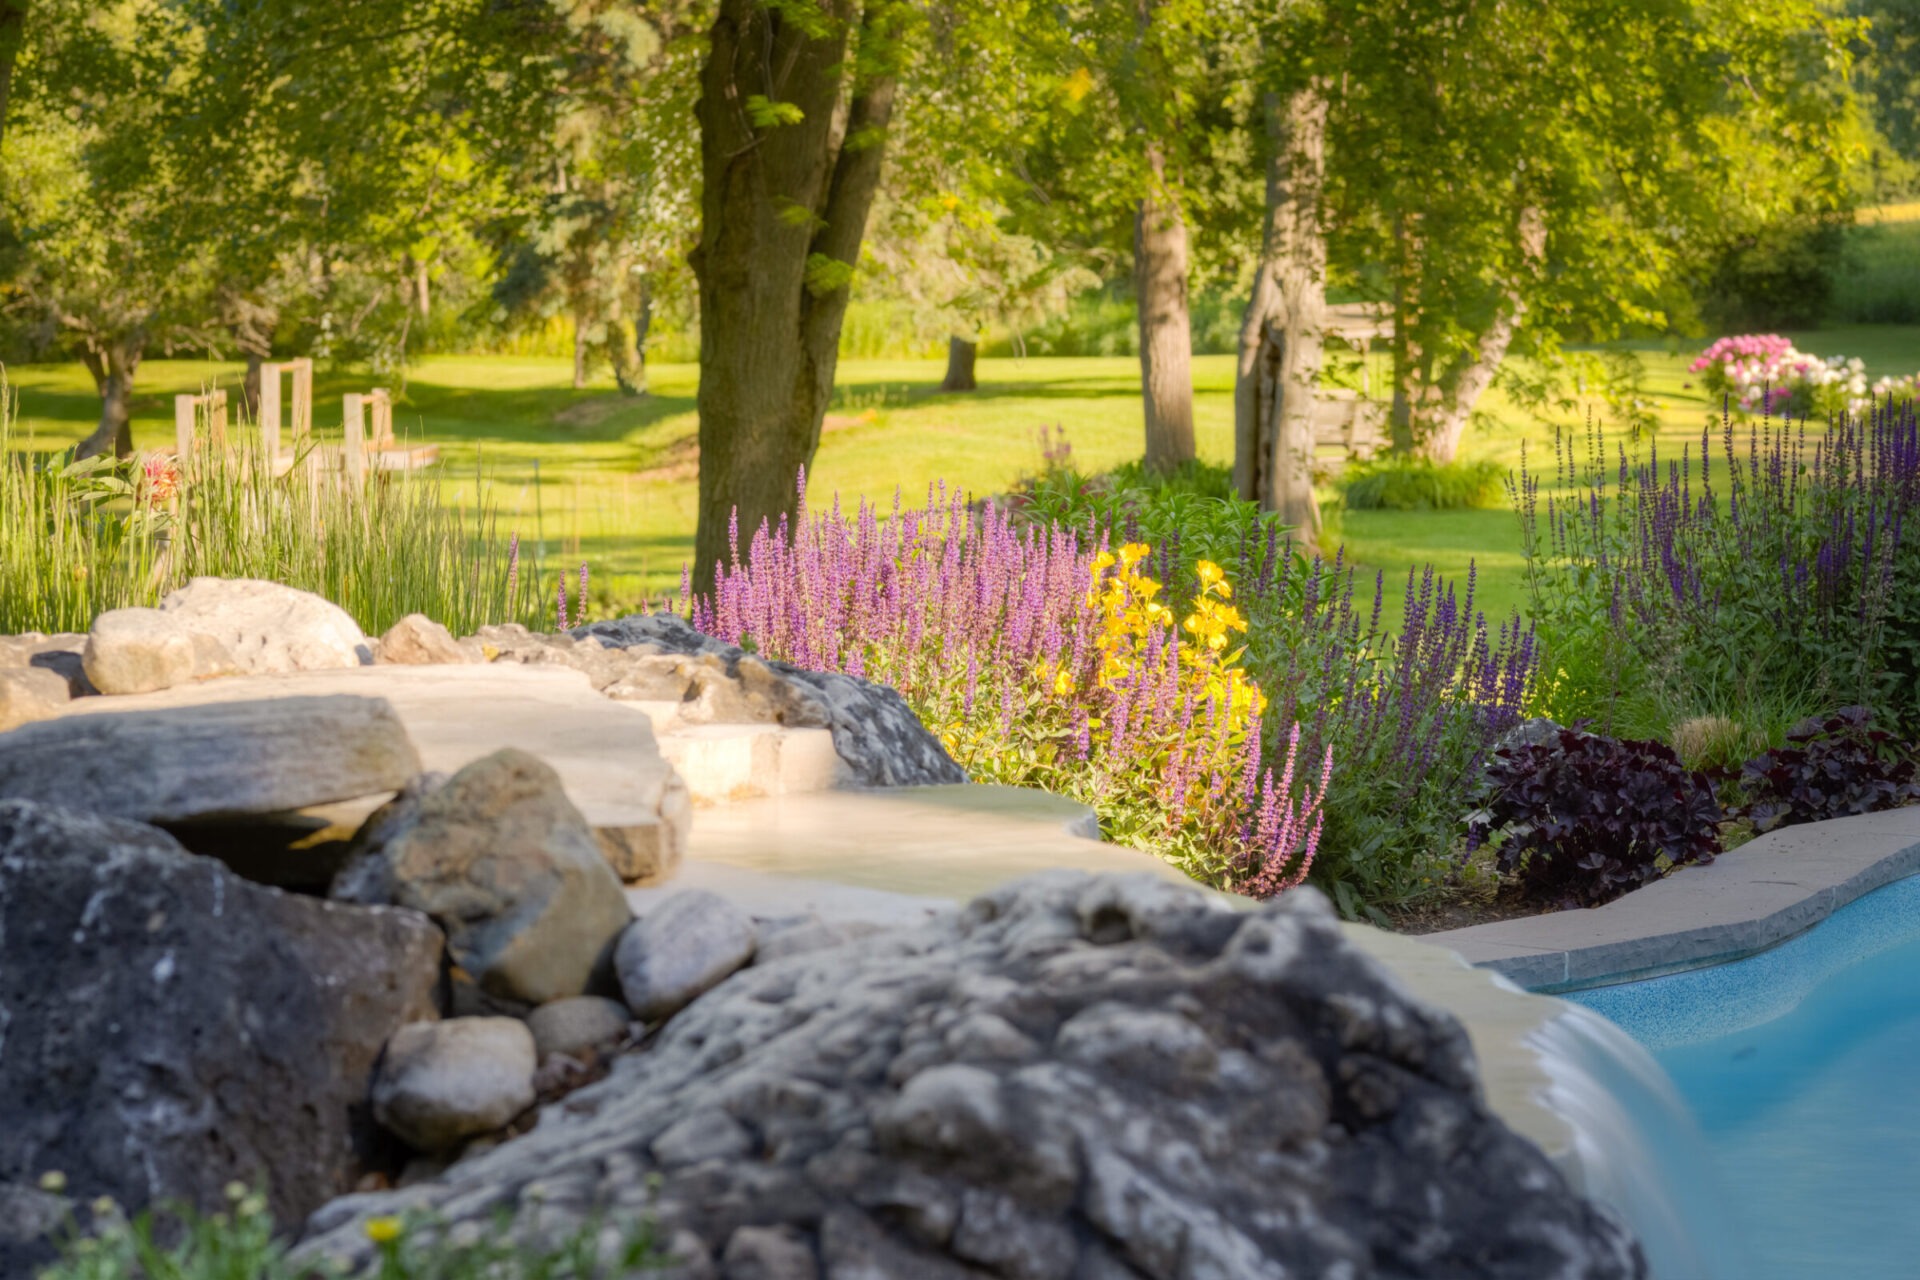 A serene garden scene with a small artificial stream, flowering purple and yellow plants, large stones, lush trees, and green grass in soft sunlight.